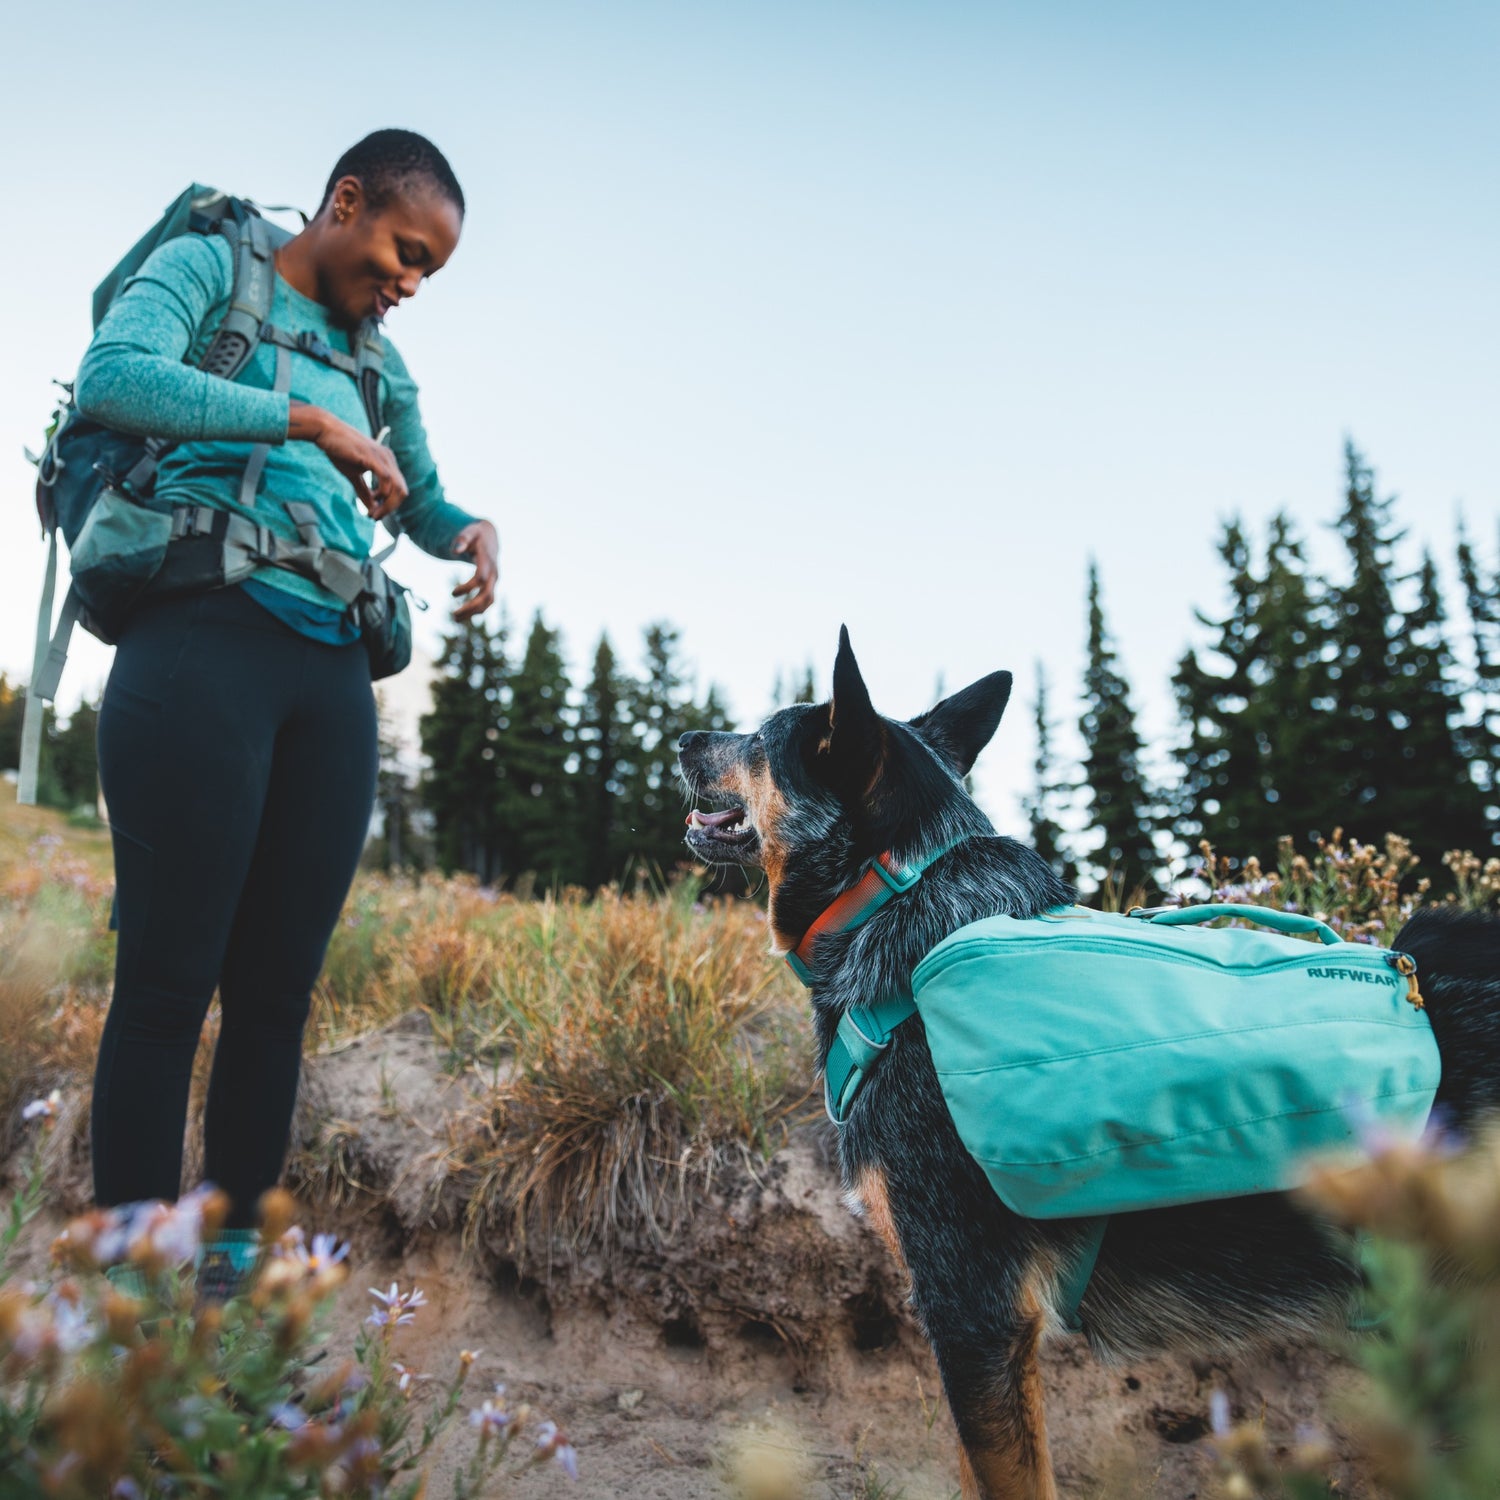 Ruffwear Front Range Day Pack, sac à dos pour chien